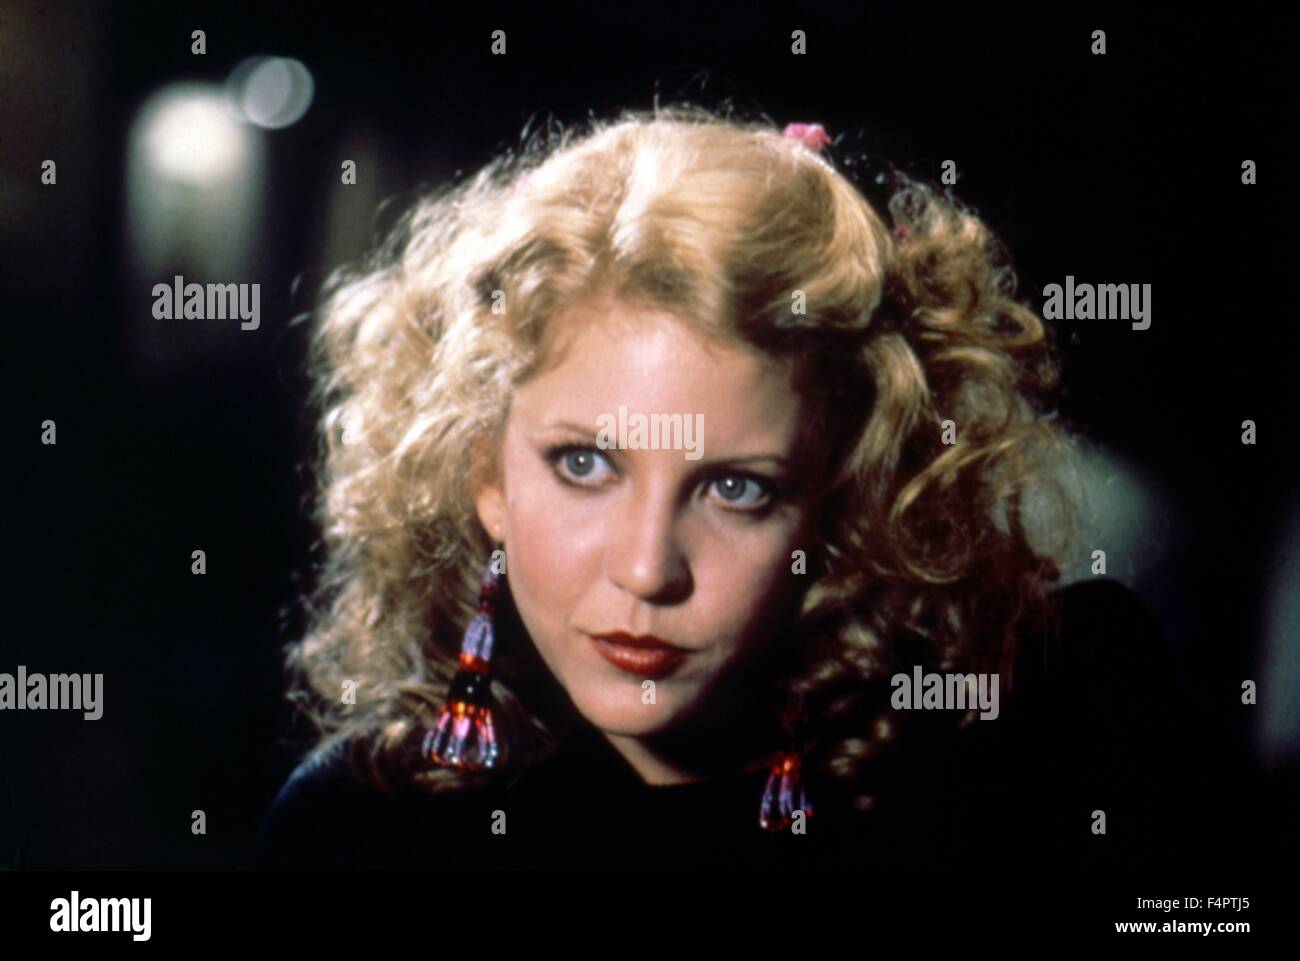 Nancy Allen / Dressed To Kill / 1980 directed by Brian De Palma  [Orion Pictures corporation / Fil] Stock Photo